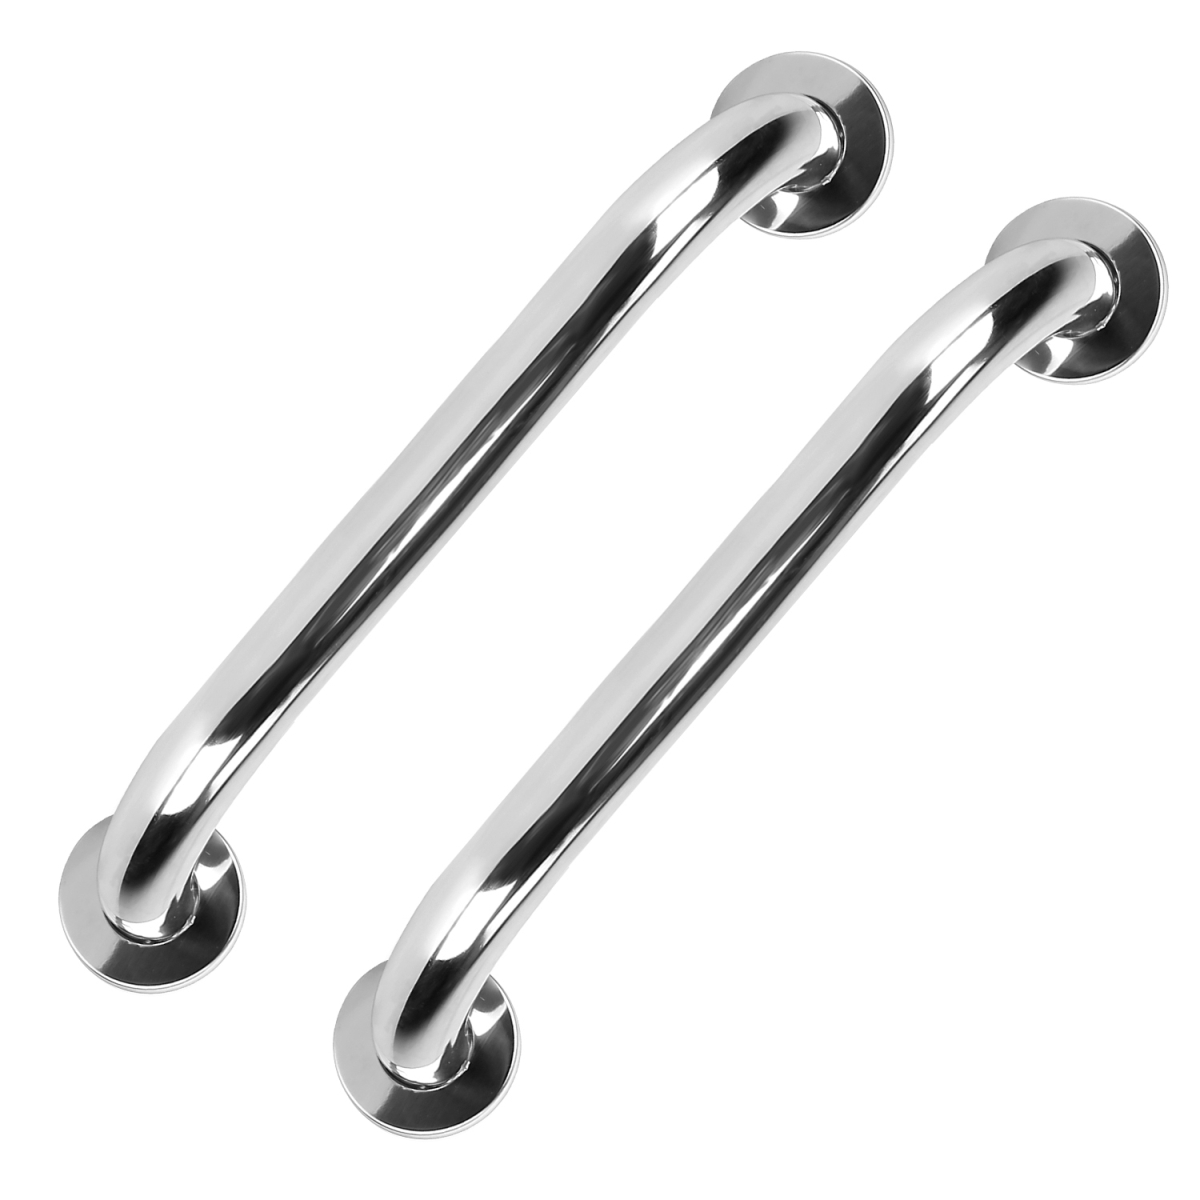 Picture of Fresh Fab Finds FFF-50cm-GPCT3153 11.8 in. 220 lbs Pull Force Sturdy Stainless Steel Shower Safety Handle Bath Grab Bar - 2 Piece